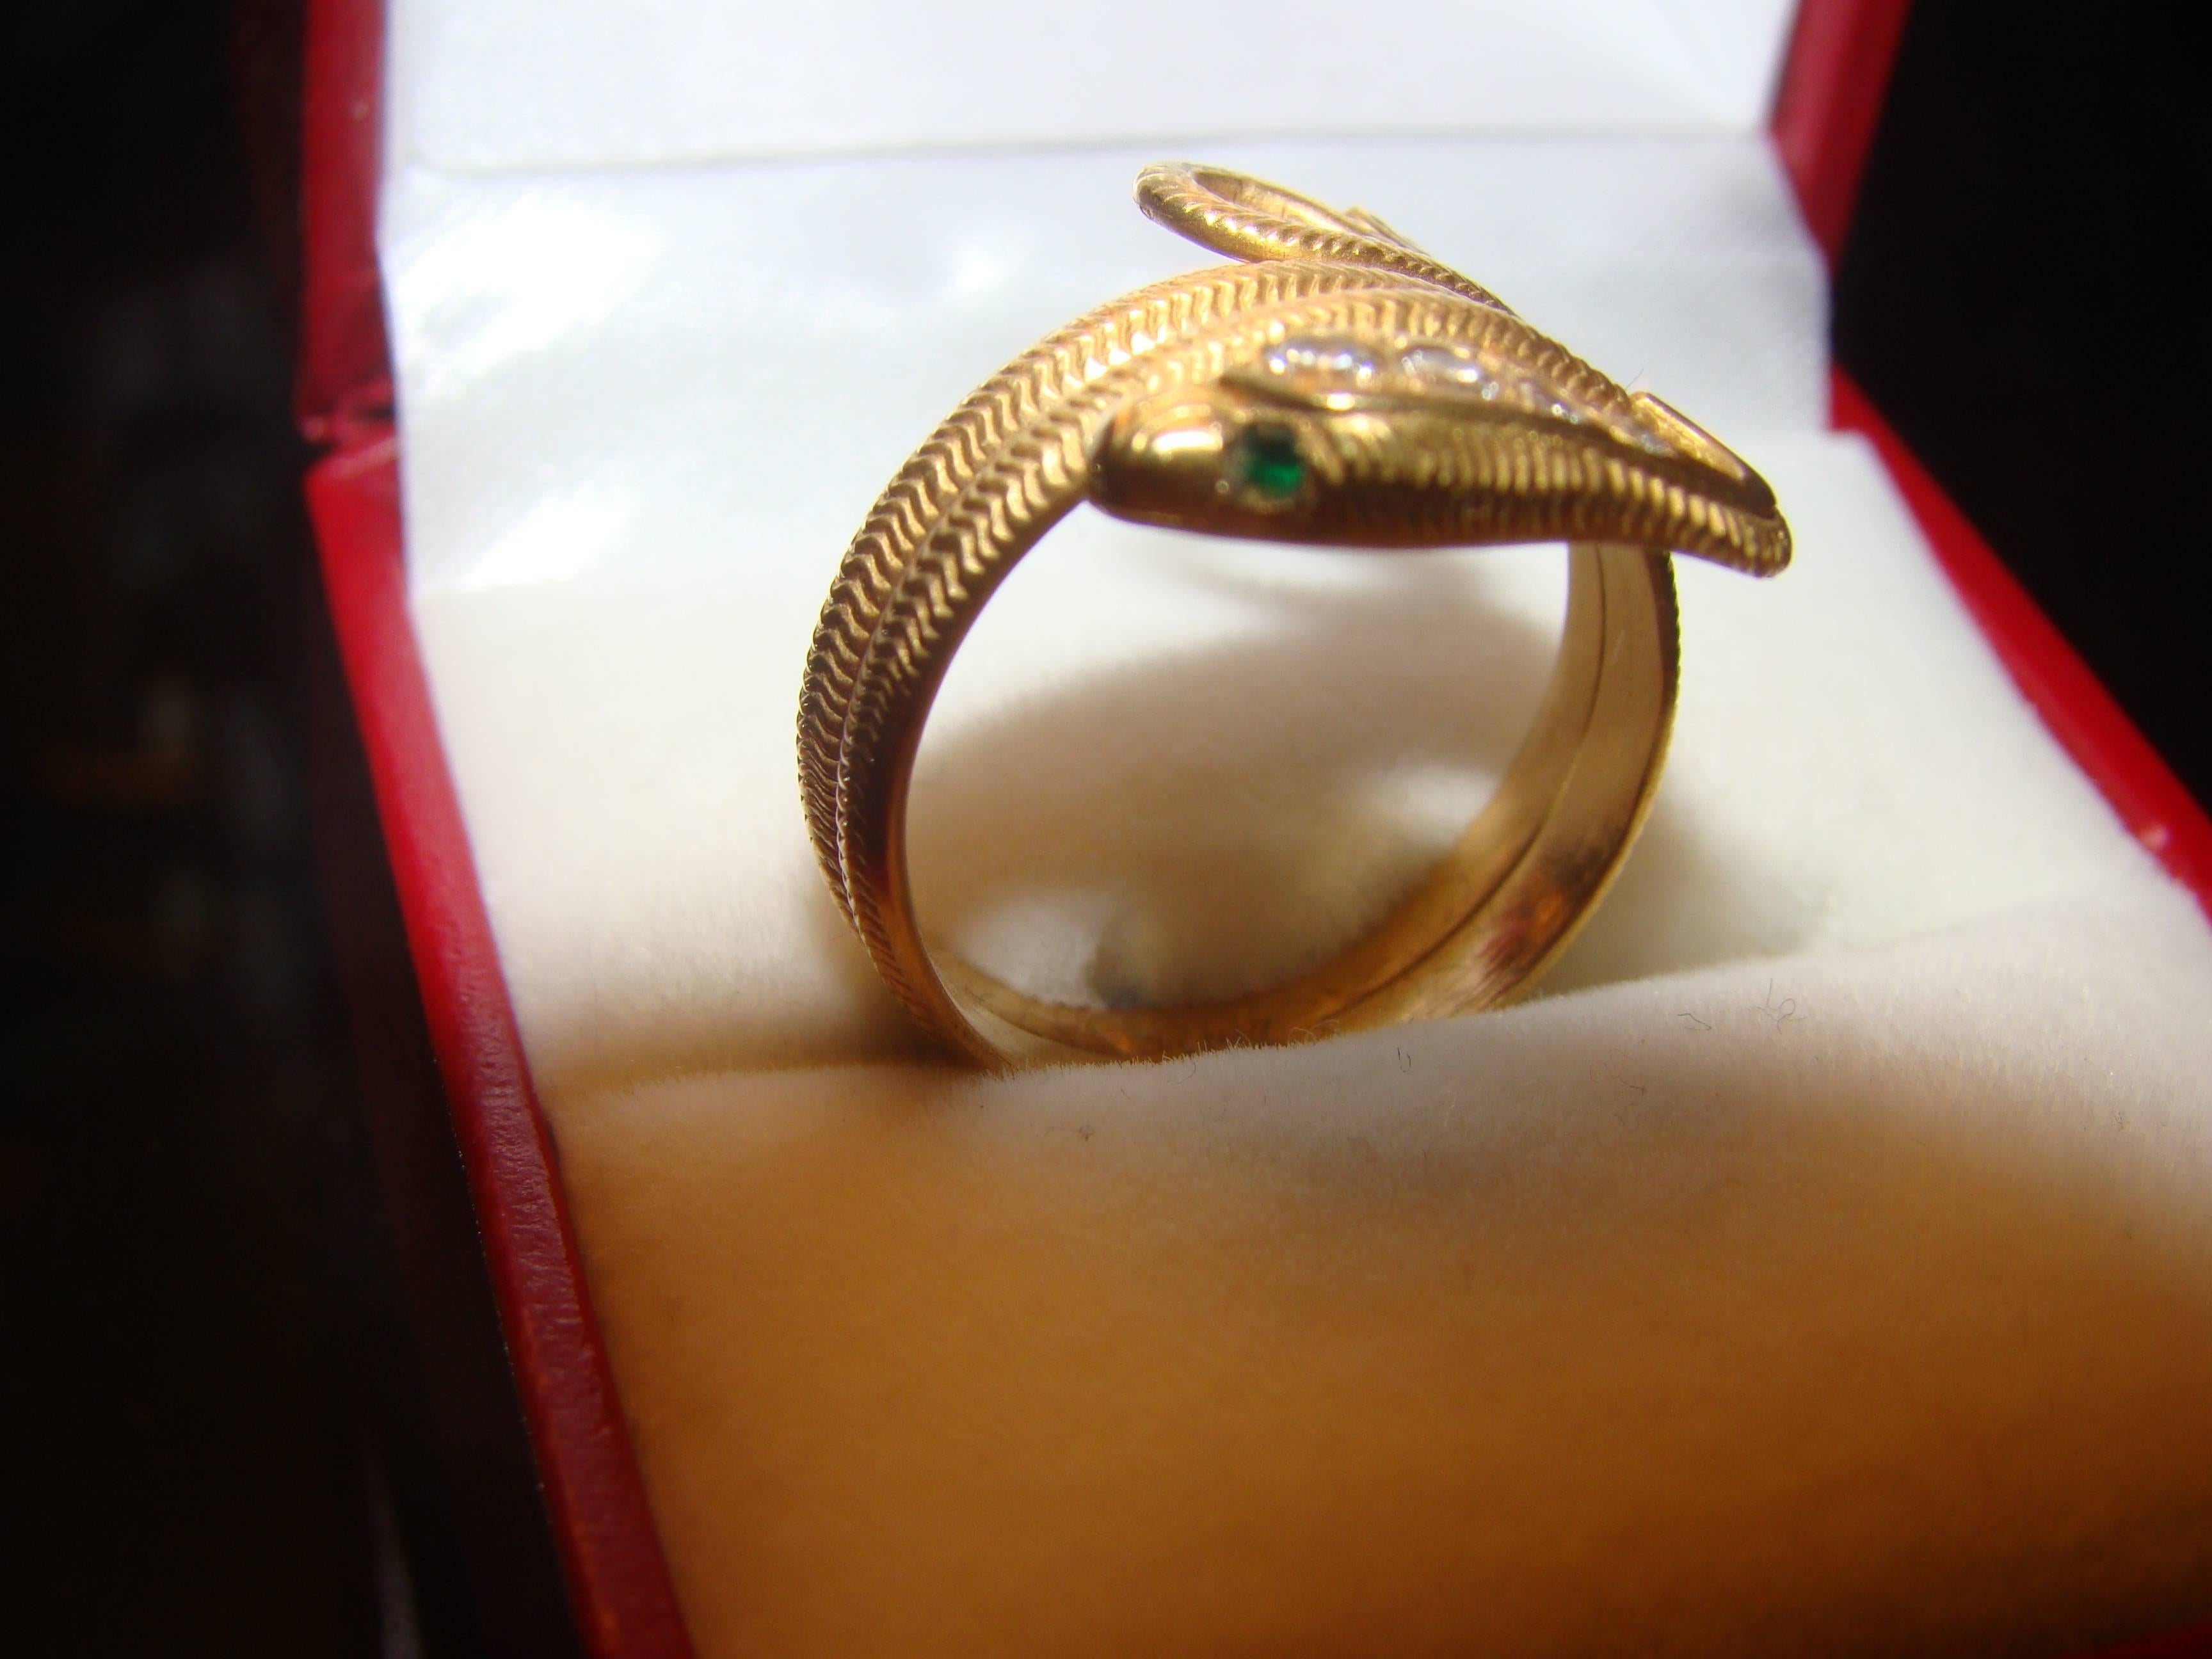 18kt Gold Antique Snake Ring with Diamonds and Emerald Eyes 3